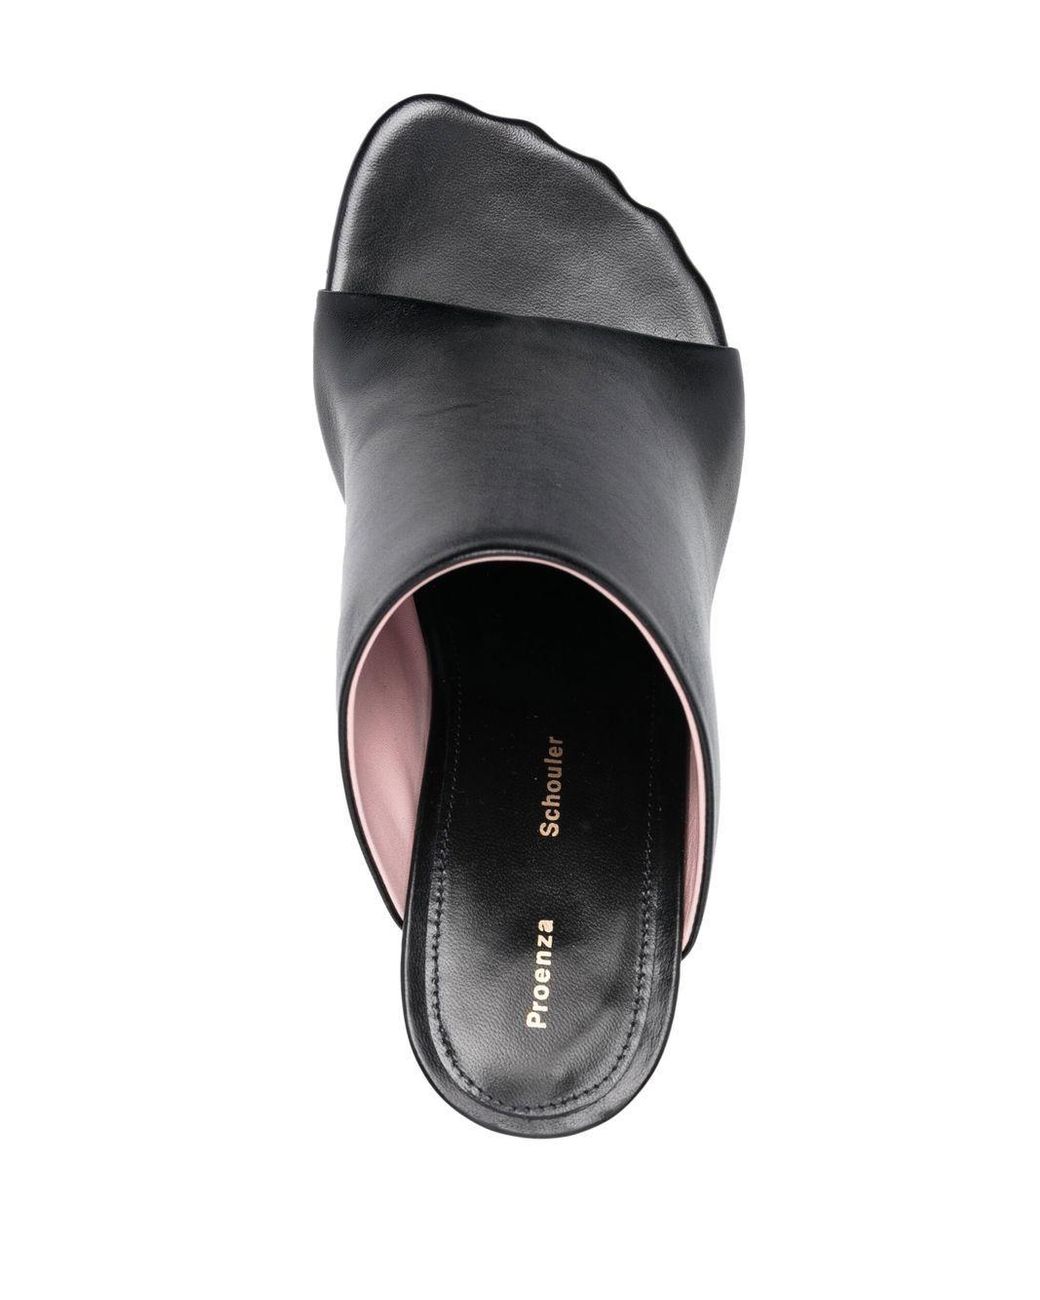 Proenza Schouler Moulded Leather 105mm Mules in Black | Lyst